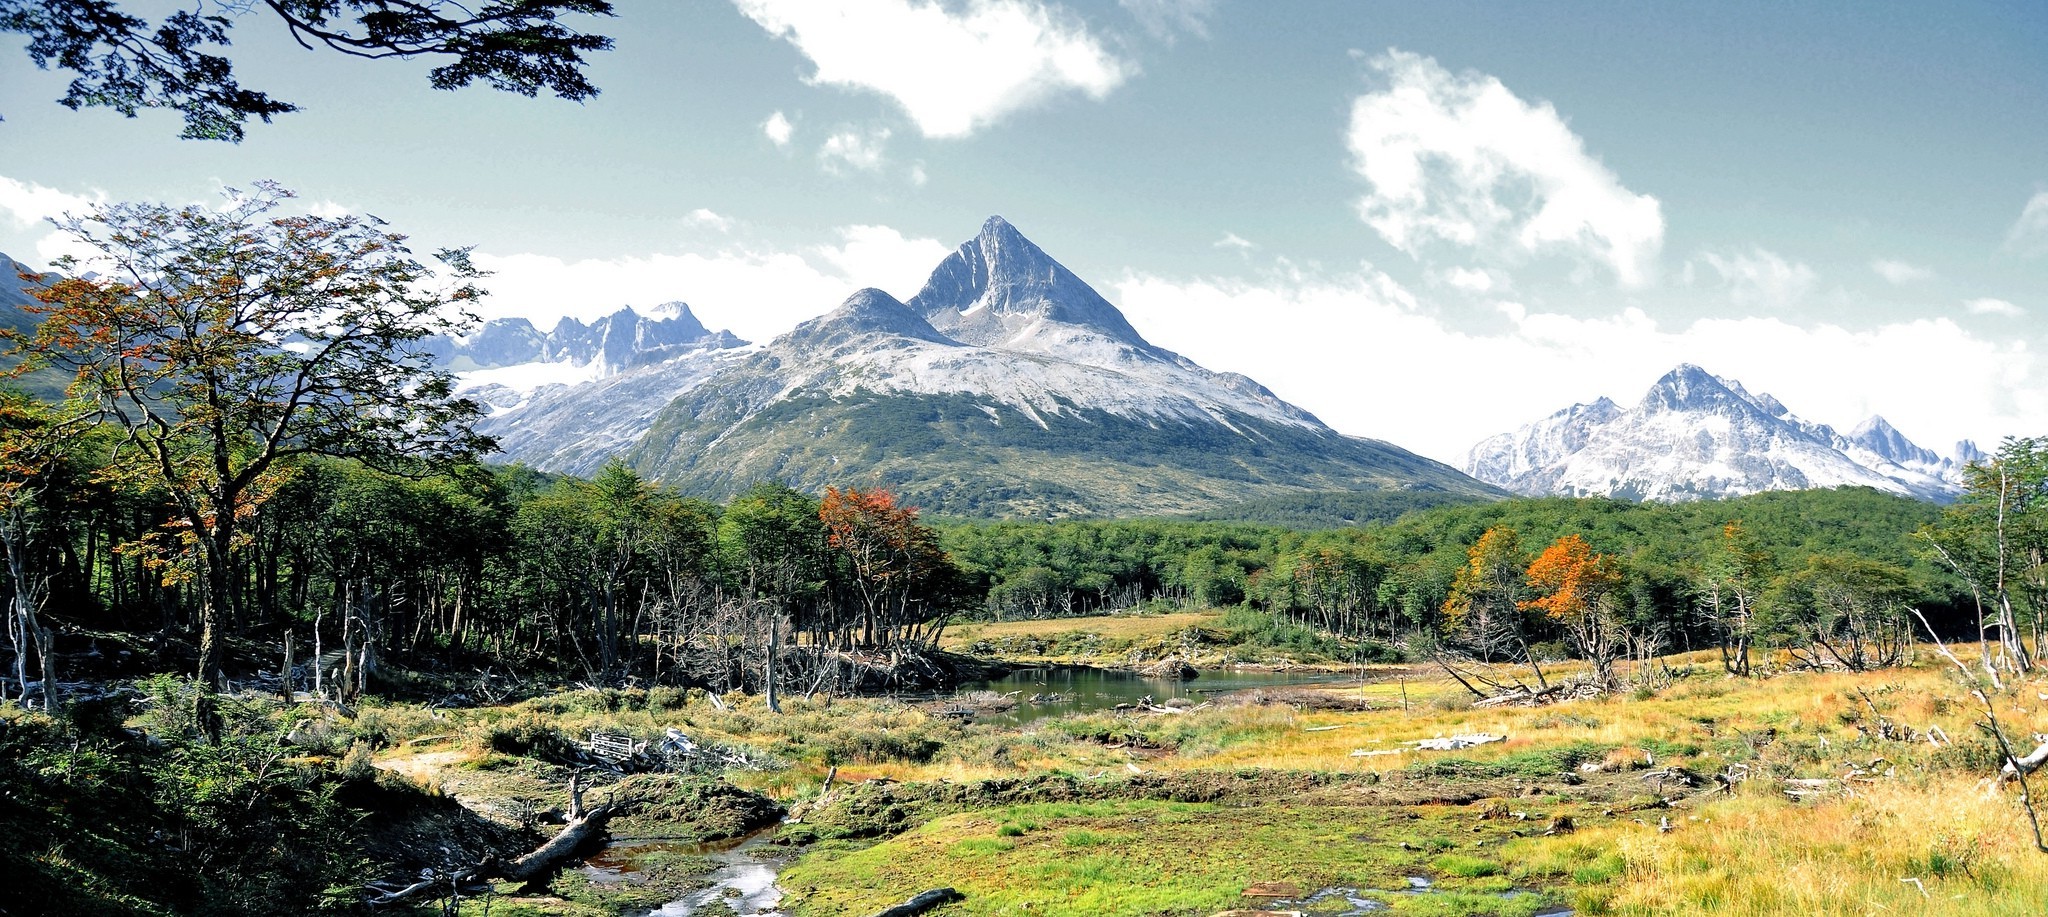 nature, Landscape, Panoramas, Mountain, Forest, Creeks, Grass, Patagonia, Tierra Del Fuego, Argentina Wallpaper